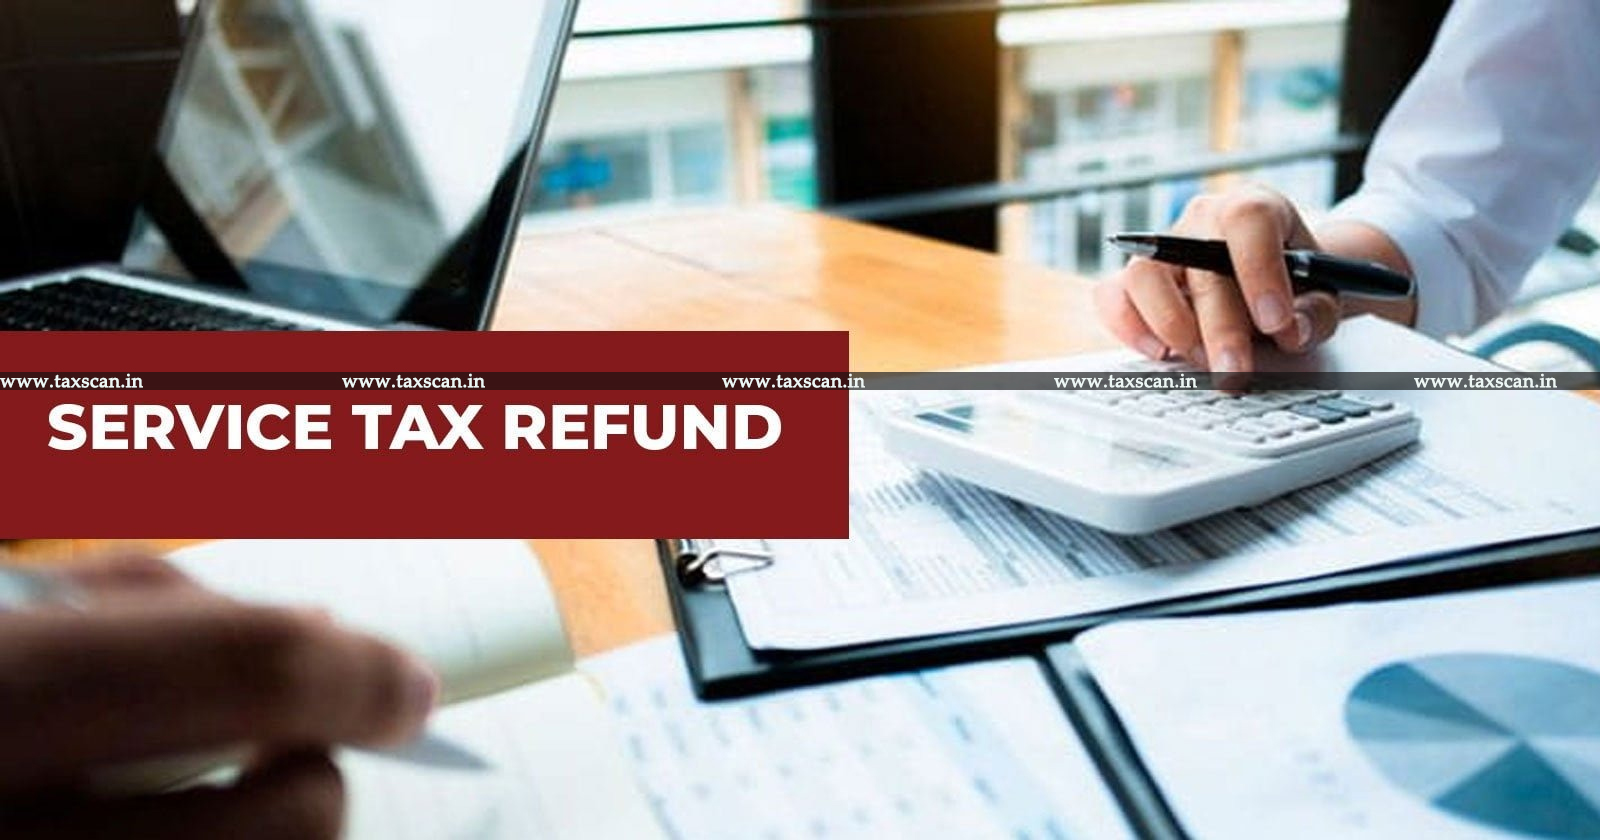 Terminal -Handling- Services - Specified- Service-CESTAT - Service -Tax- Refund-TAXSCAN